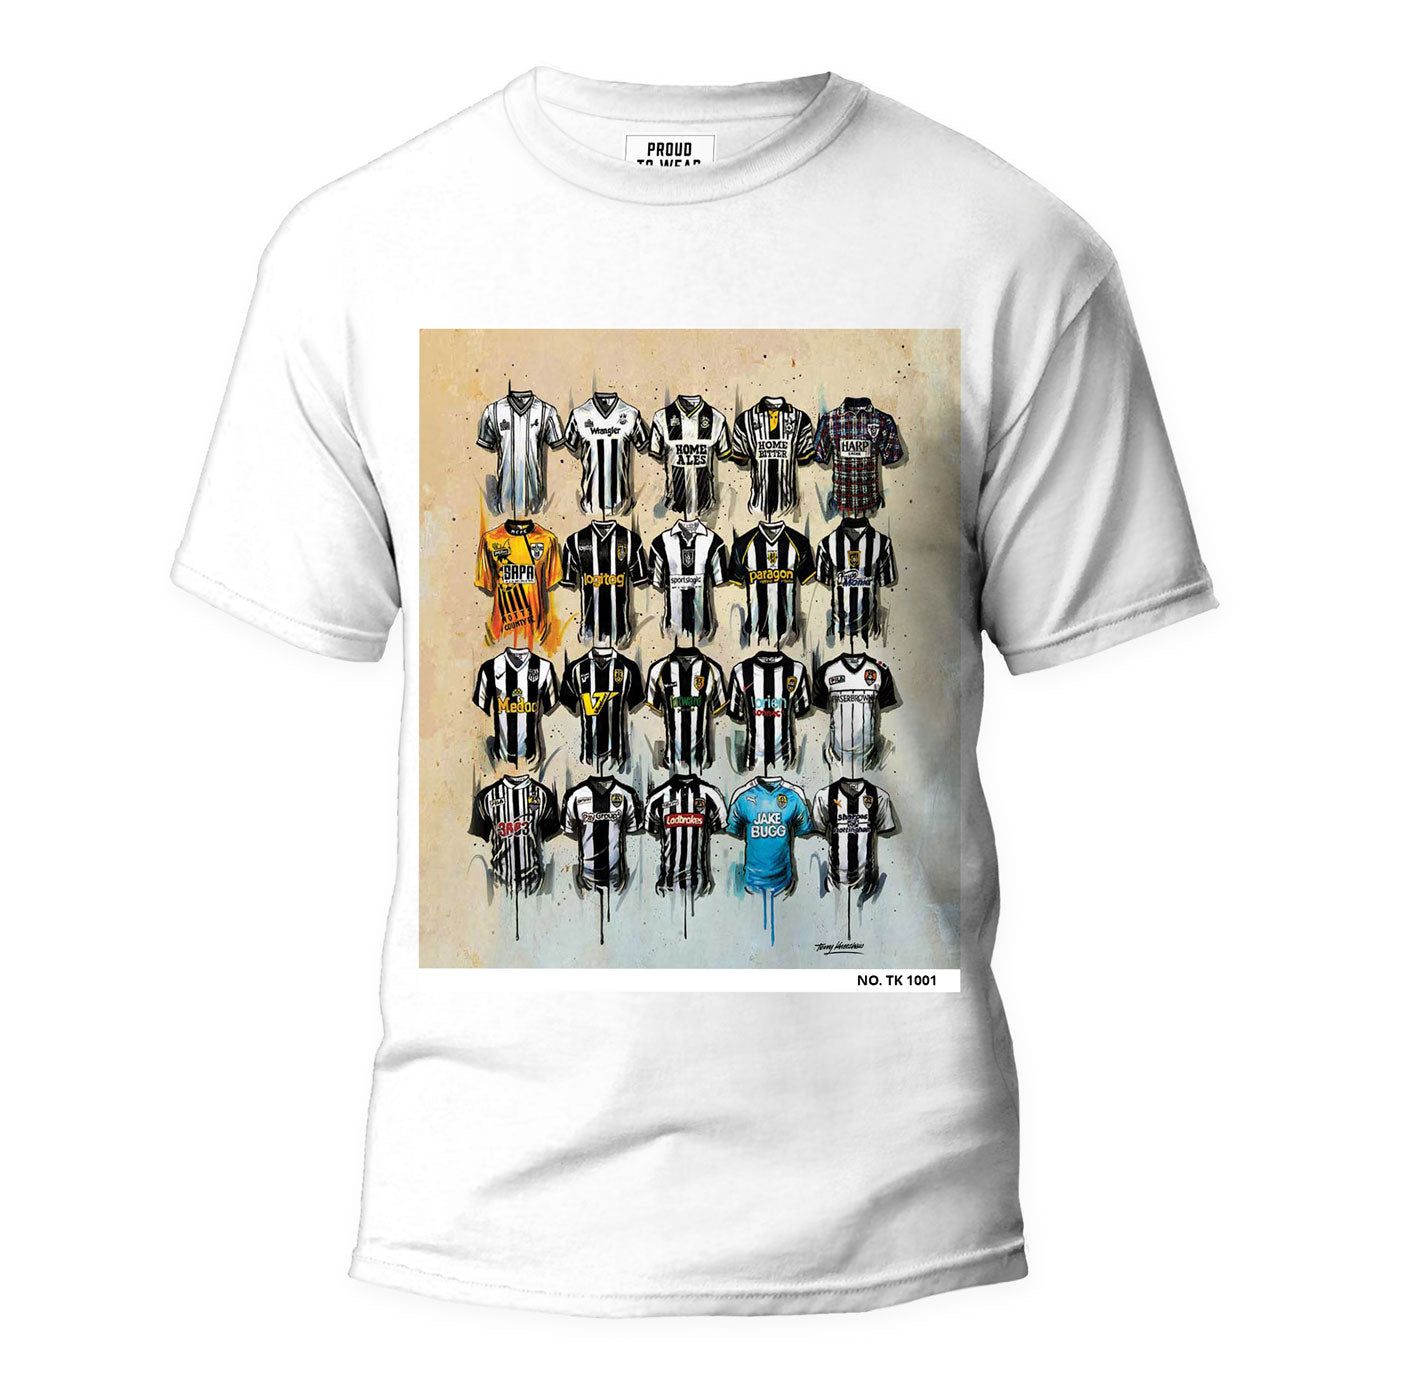 These Notts County T-shirts feature unique artwork from Terry Kneeshaw and come in sizes xxs-xxxl with a choice of black or white. Each shirt is individually numbered and one of a kind. The Notts County design pays homage to the team with striking images and colors, making them perfect for fans of the club. The T-shirts are made with high-quality materials, ensuring both comfort and durability. Show your support for Notts County with these exclusive T-shirts.